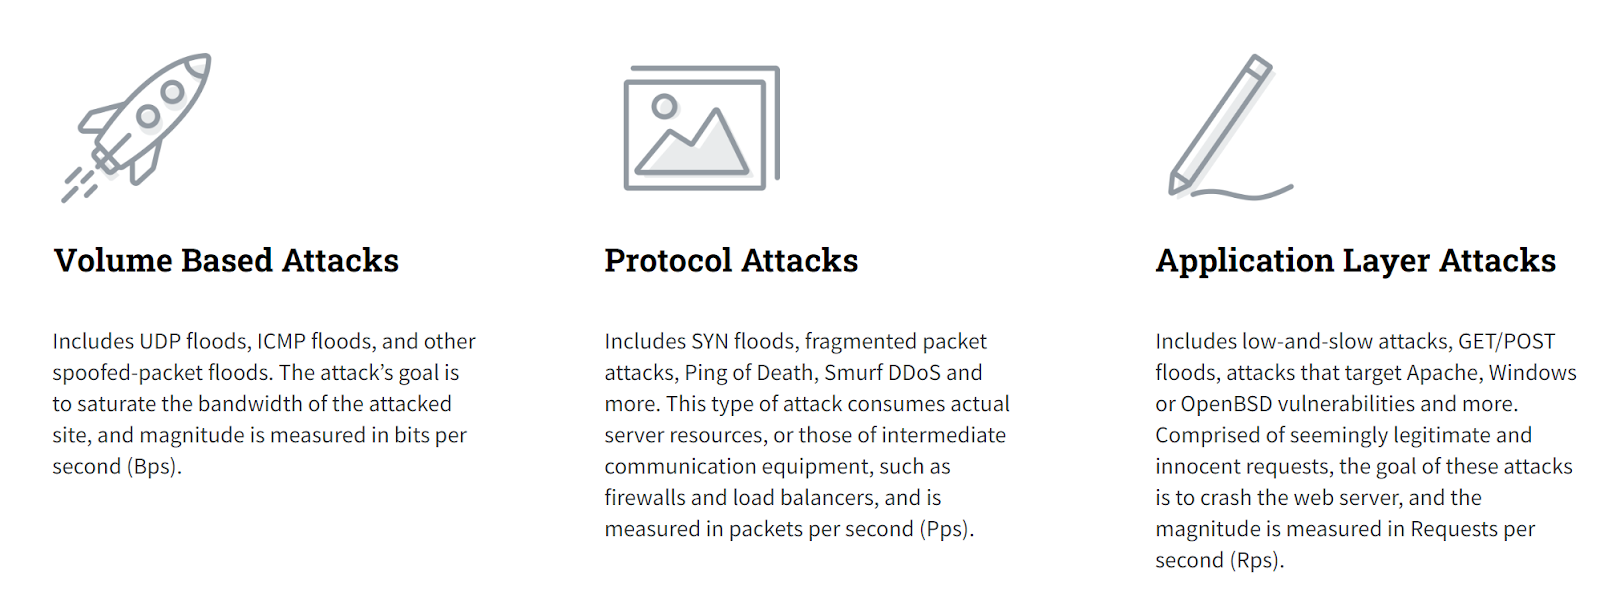 Volume Based Attacks: Includes UDP floods, ICMP floods, and other spoofed-packet floods. The attack’s goal is to saturate the bandwidth of the attacked site, and magnitude is measured in bits per second (Bps).

Protocol Attacks: Includes SYN floods, fragmented packet attacks, Ping of Death, Smurf DDoS and more. This type of attack consumes actual server resources, or those of intermediate communication equipment, such as firewalls and load balancers, and is measured in packets per second (Pps).

Application Layer Attacks: Includes low-and-slow attacks, GET/POST floods, attacks that target Apache, Windows or OpenBSD vulnerabilities and more. Comprised of seemingly legitimate and innocent requests, the goal of these attacks is to crash the web server, and the magnitude is measured in Requests per second (Rps).